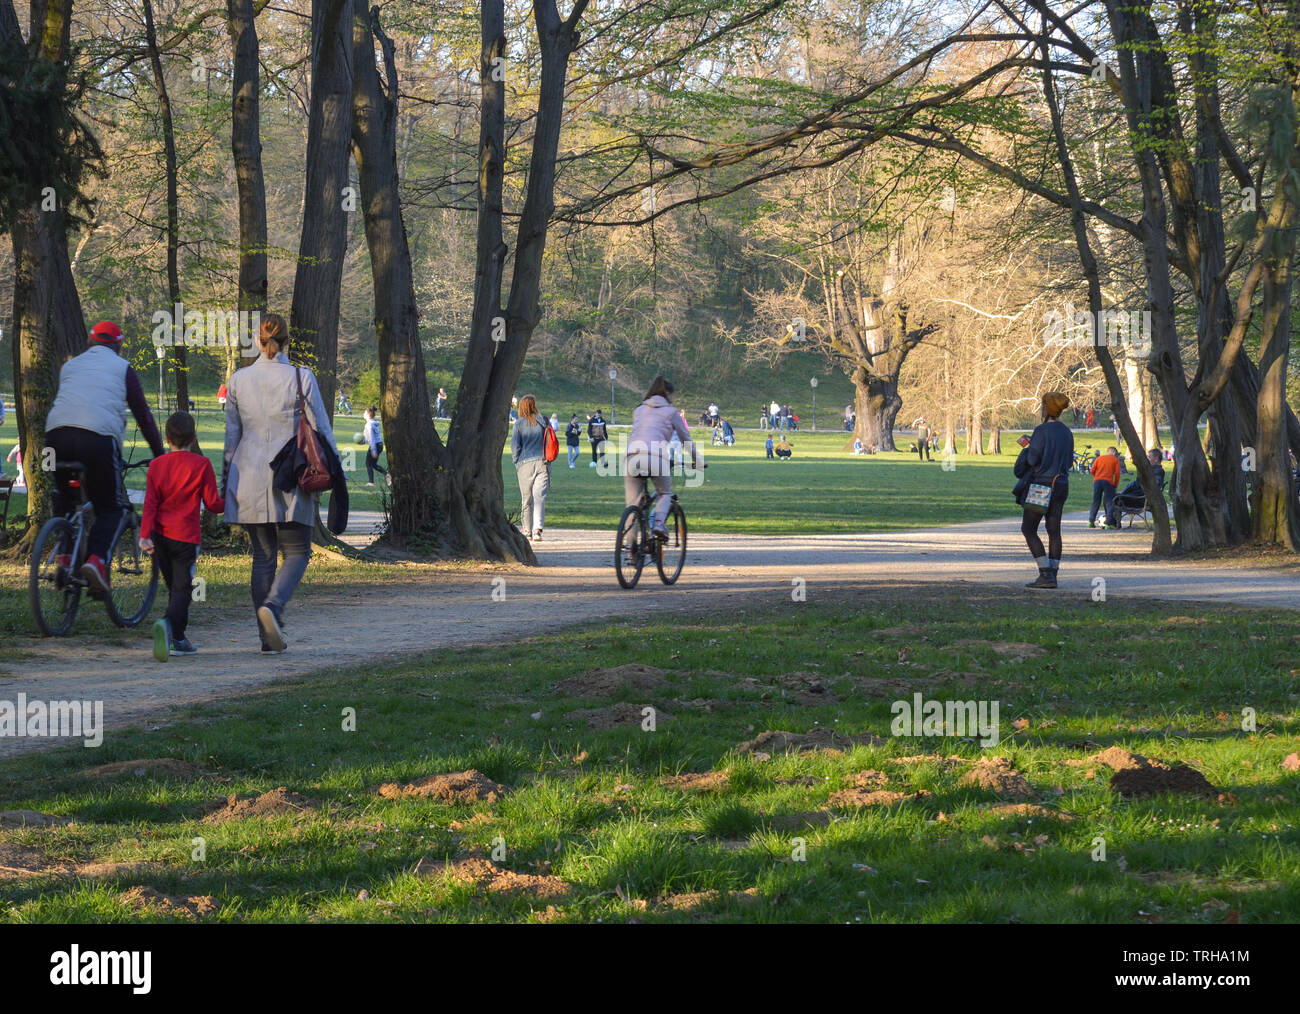 People outdoor activities at city park Maksimir Stock Photo